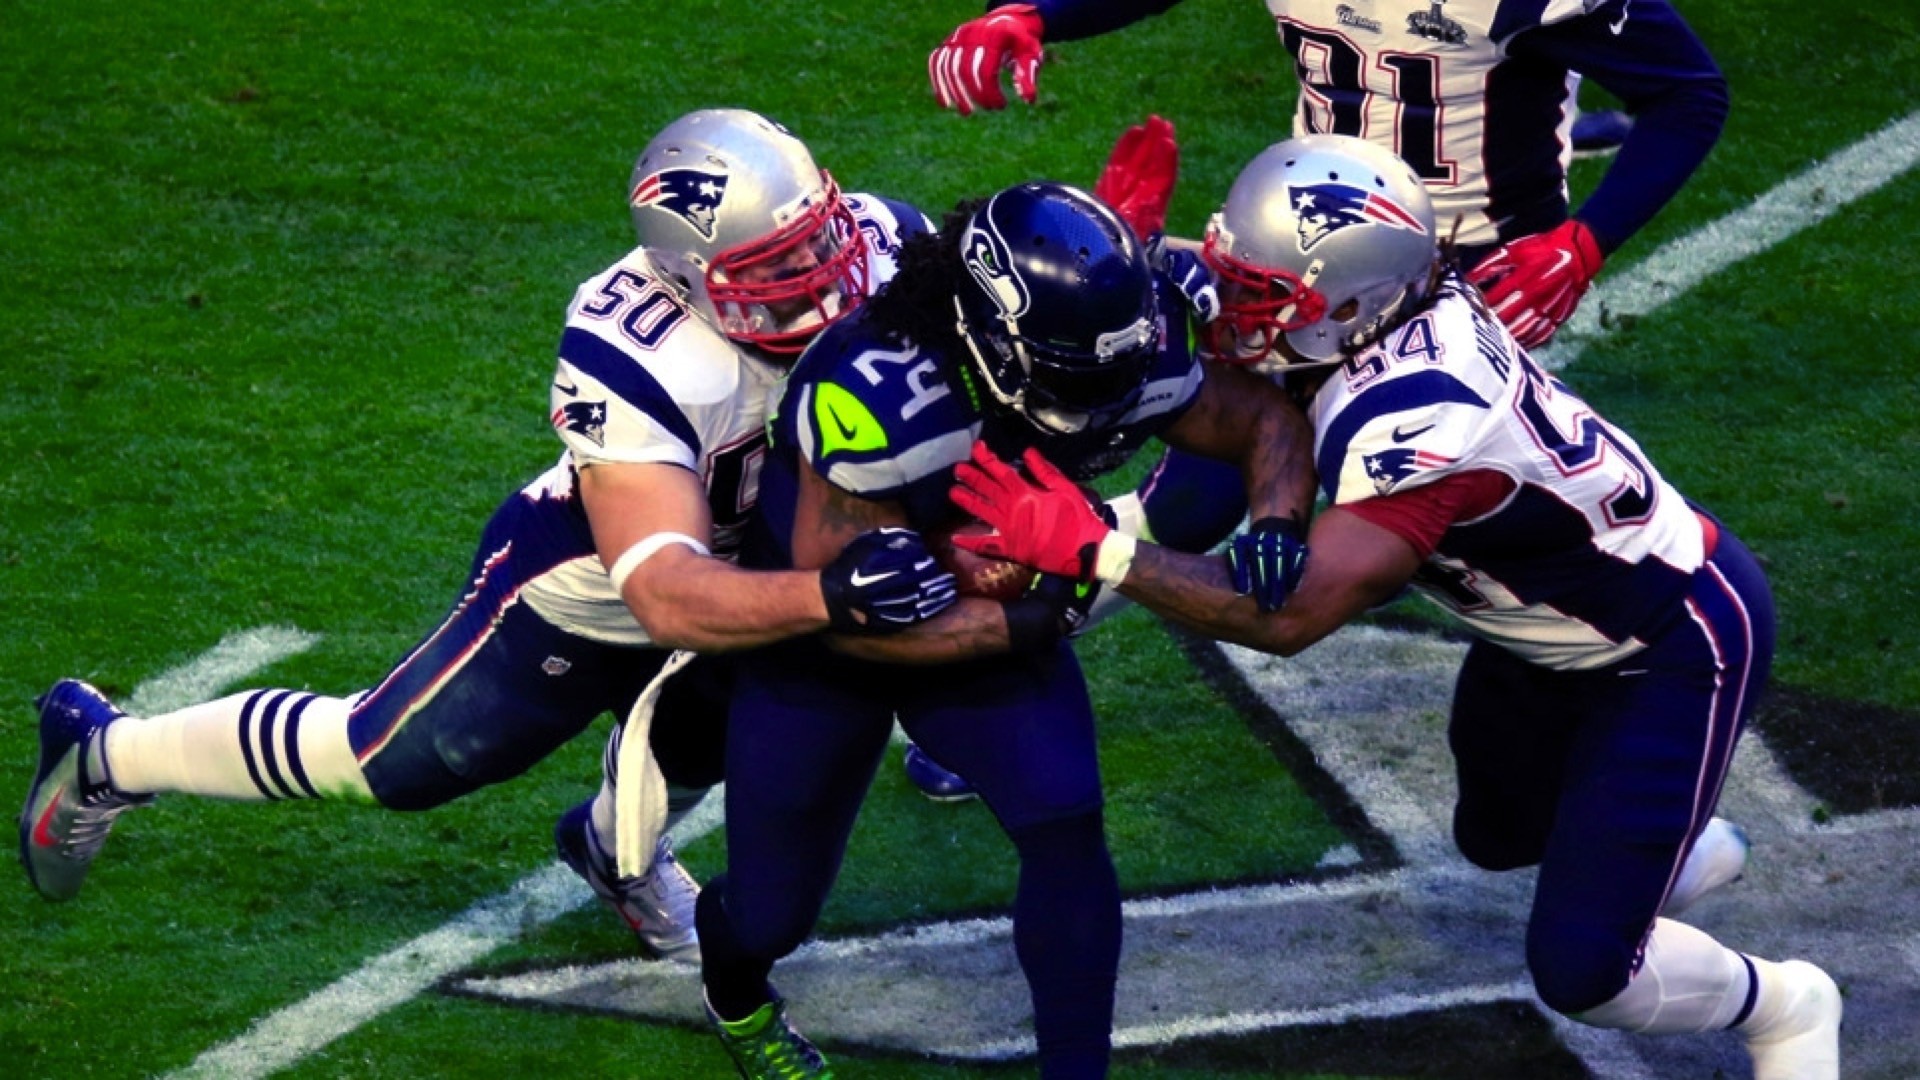 Marshawn Lynch scores Seahawks' first touchdown against Patriots NFL S...